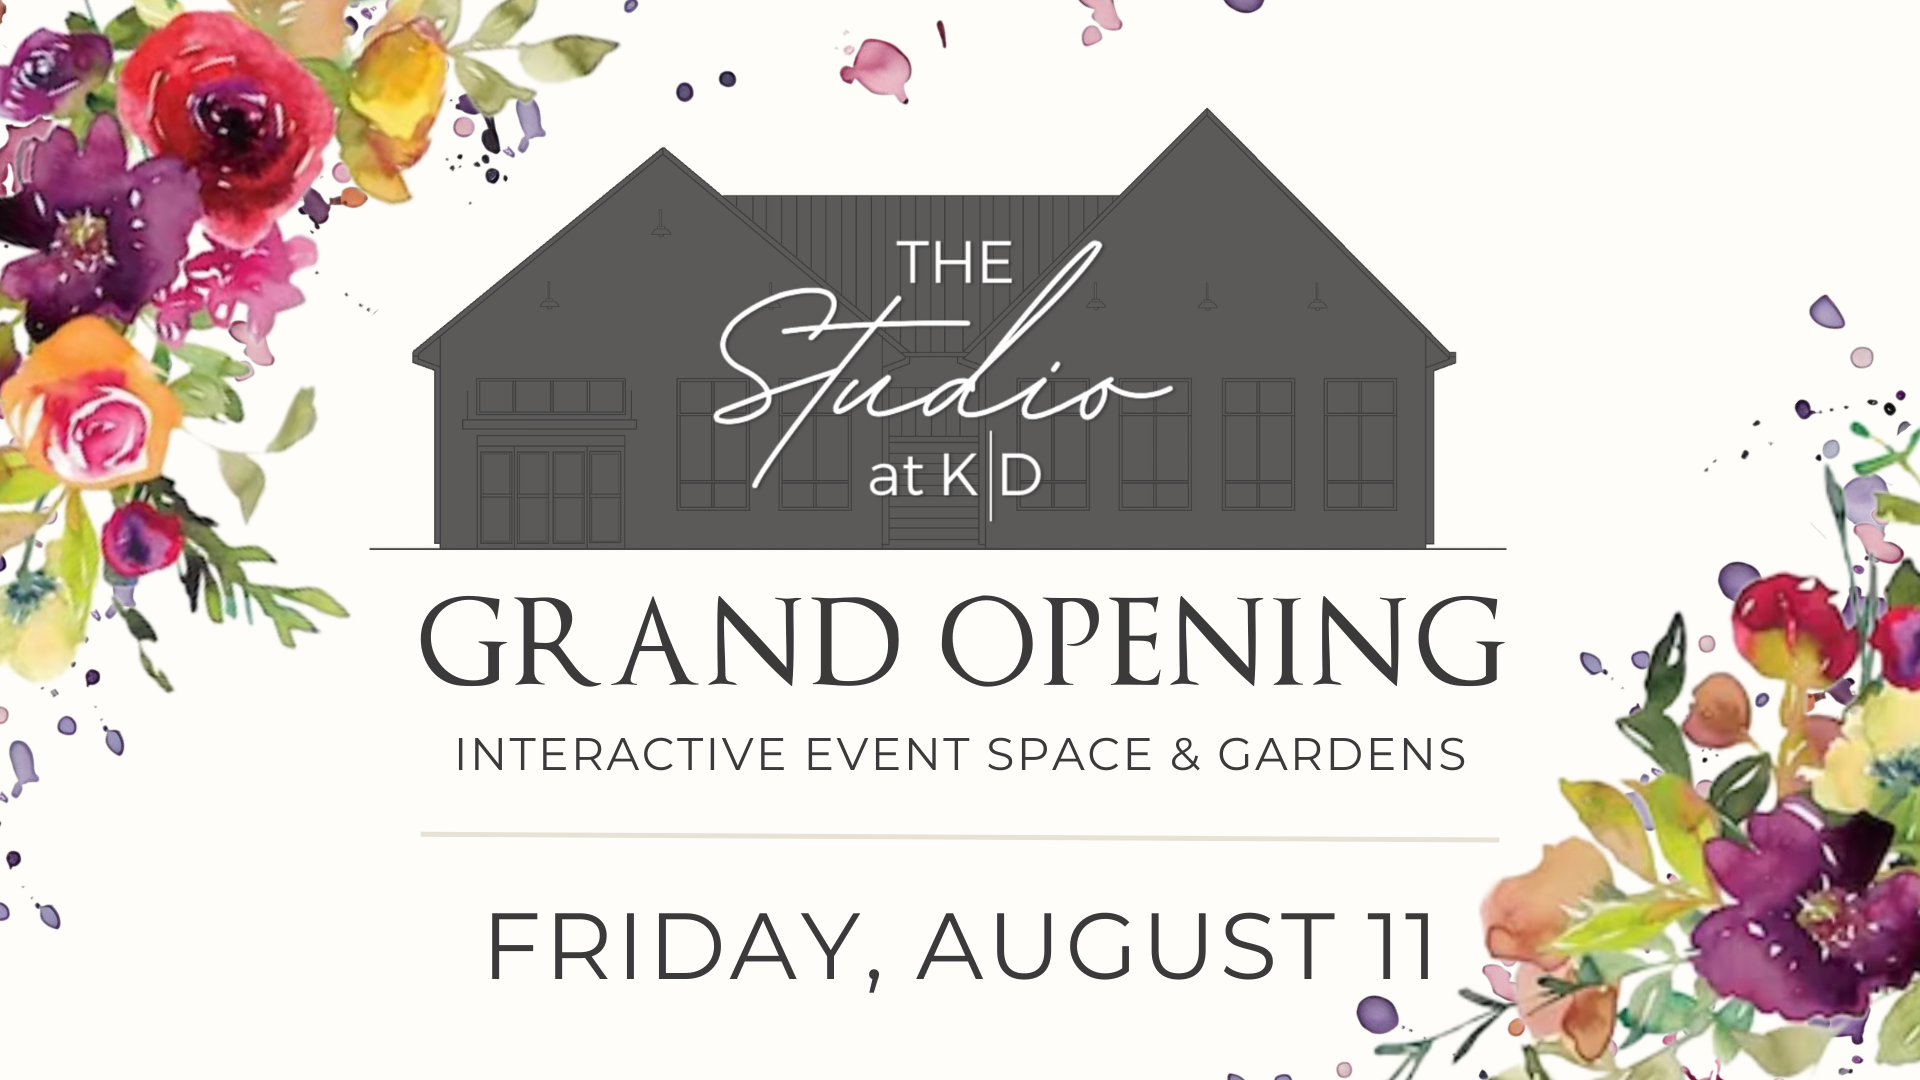 Grand Opening of The Studio at KD in Tulsa, Oklahoma